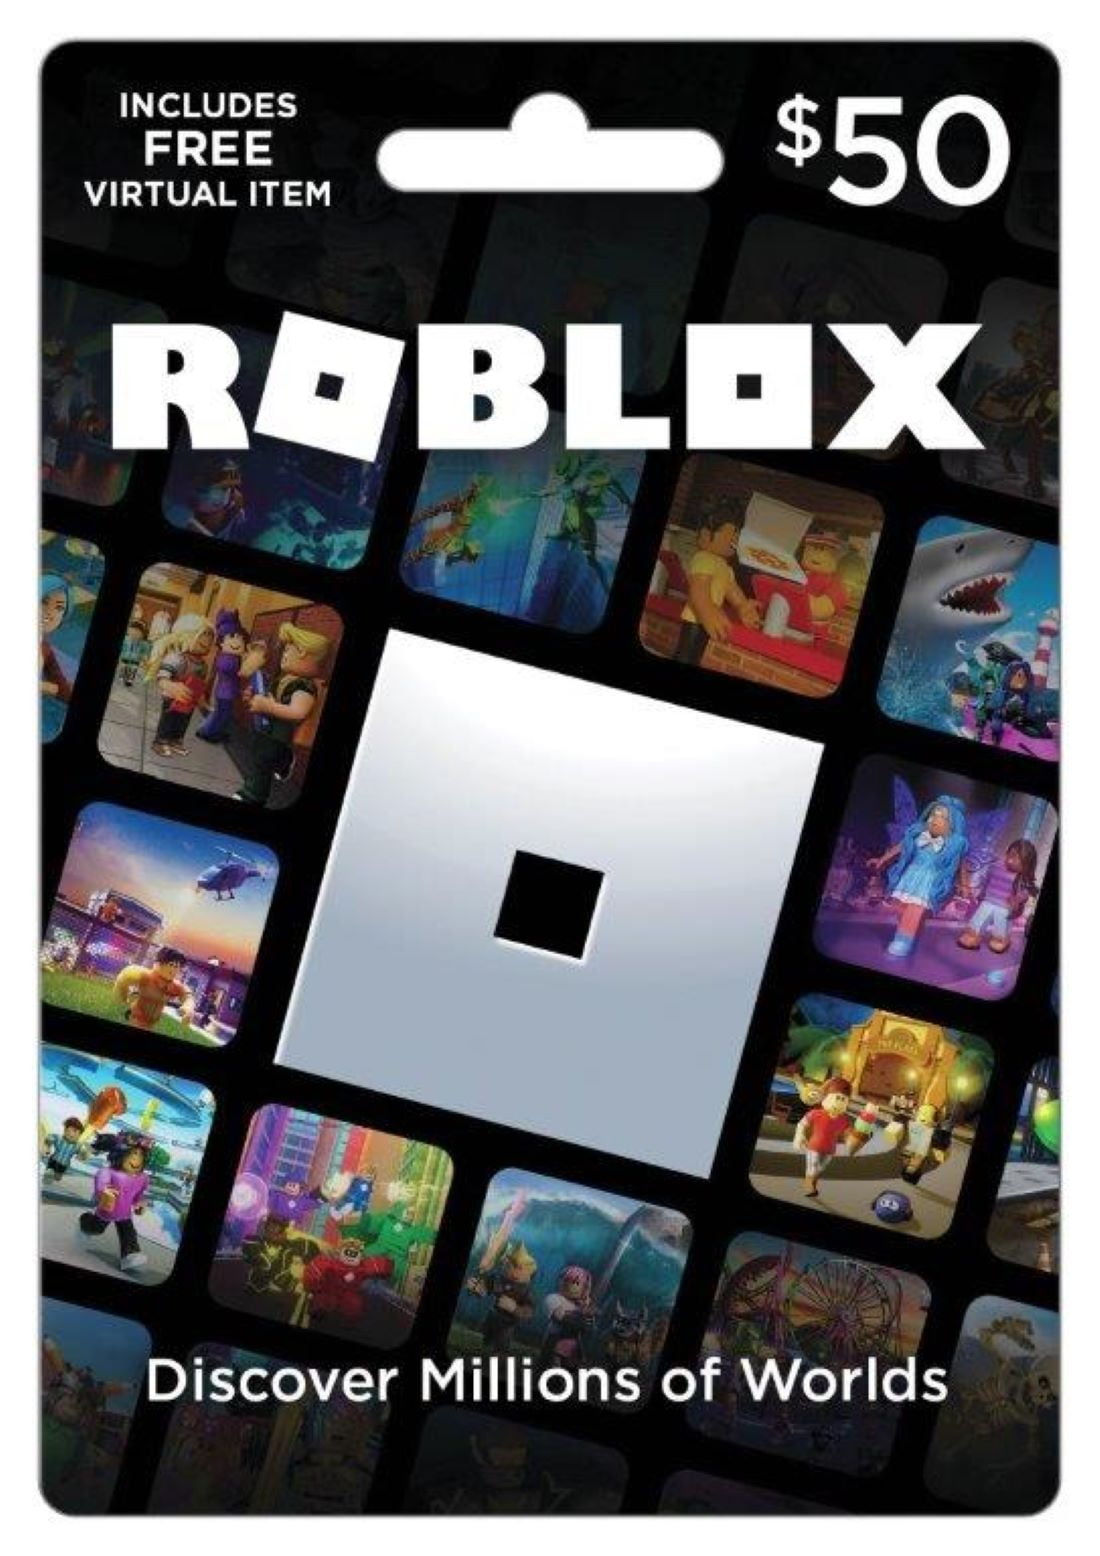 Roblox $50 Digital Gift Card (Includes Exclusive Virtual Item